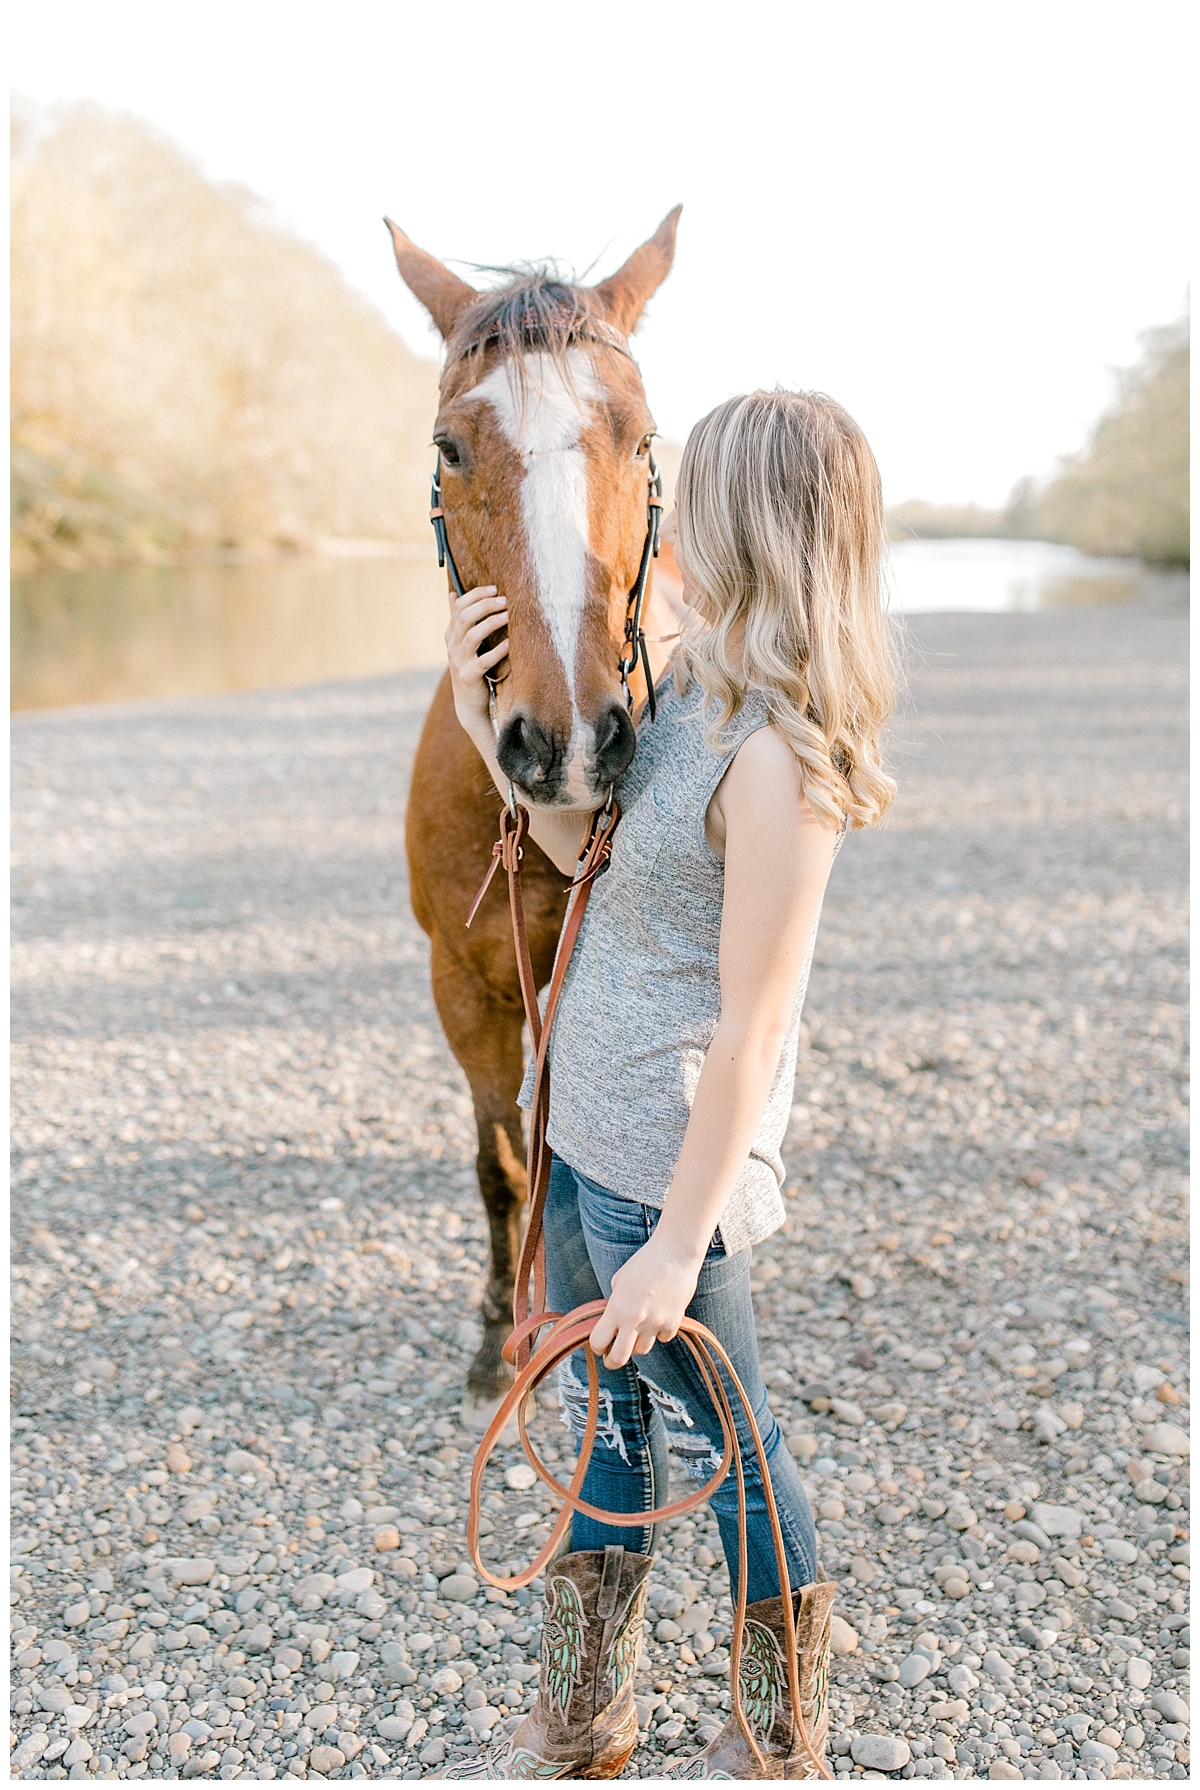 Sunset Senior Session with Horse | Senior Session Inspiration Session | Horse Photo Session | Pacific Northwest Light and Airy Wedding and Portrait Photographer | Emma Rose Company | Kindred Presets Riverside.jpg